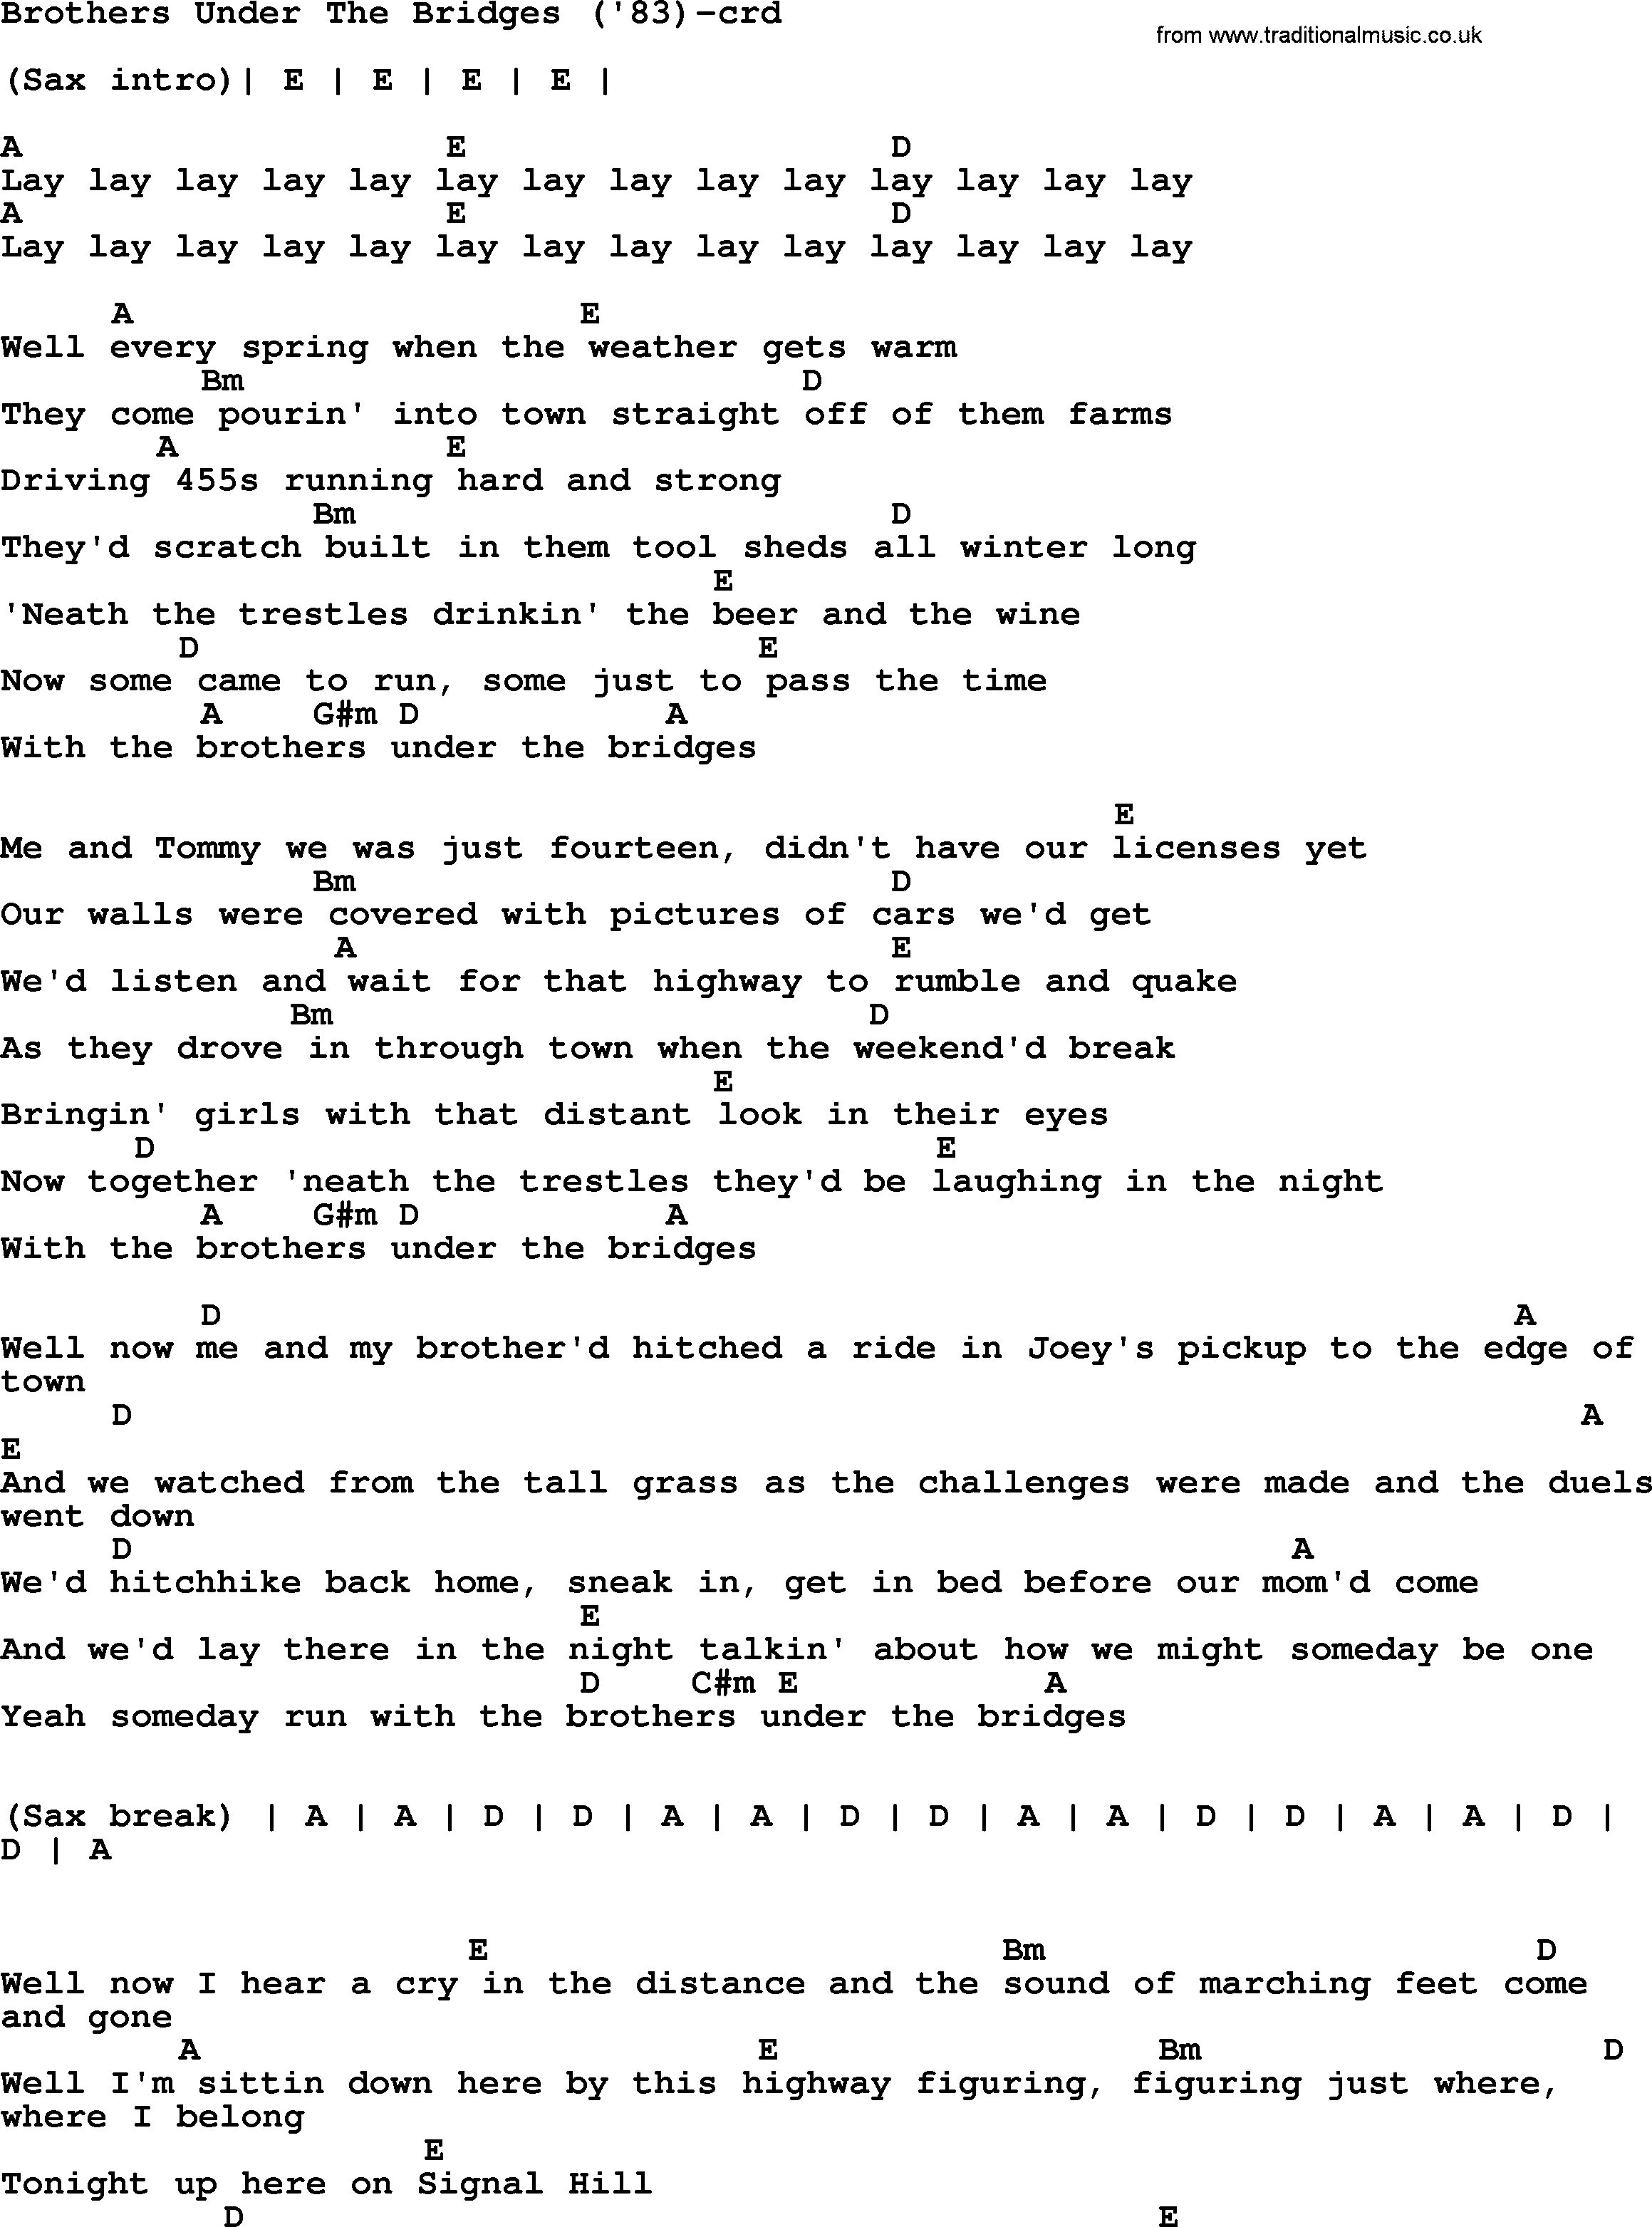 Bruce Springsteen song: Brothers Under The Bridges('83), lyrics and chords